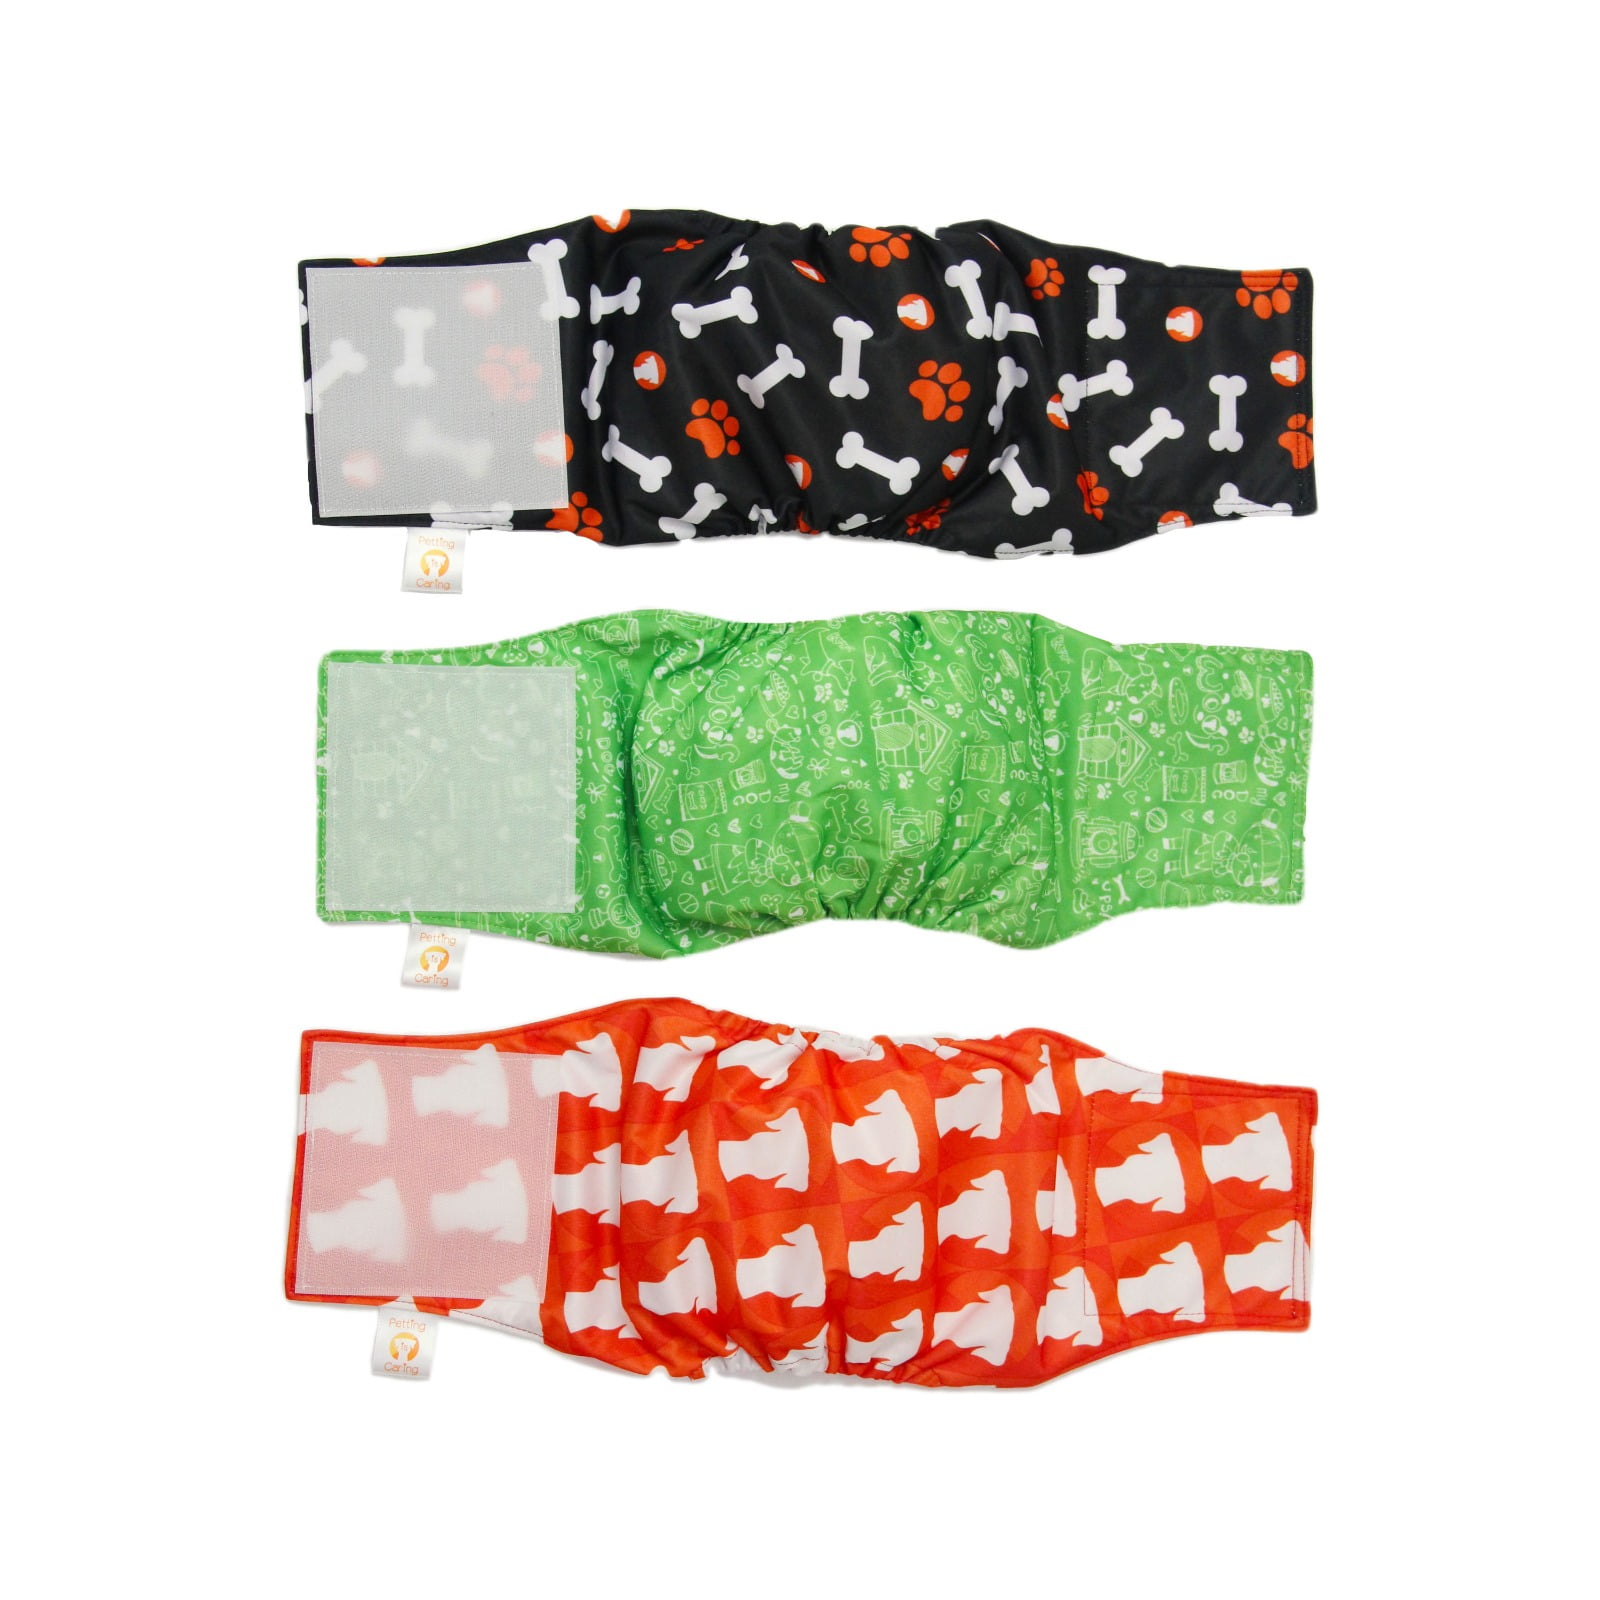 3 Pack Set Size PETTING IS CARING Male Dog Wraps Washable & Reusable Belly Band Diapers Materials Durable Machine Washable Solution for Pets Incontinence Long Travels 